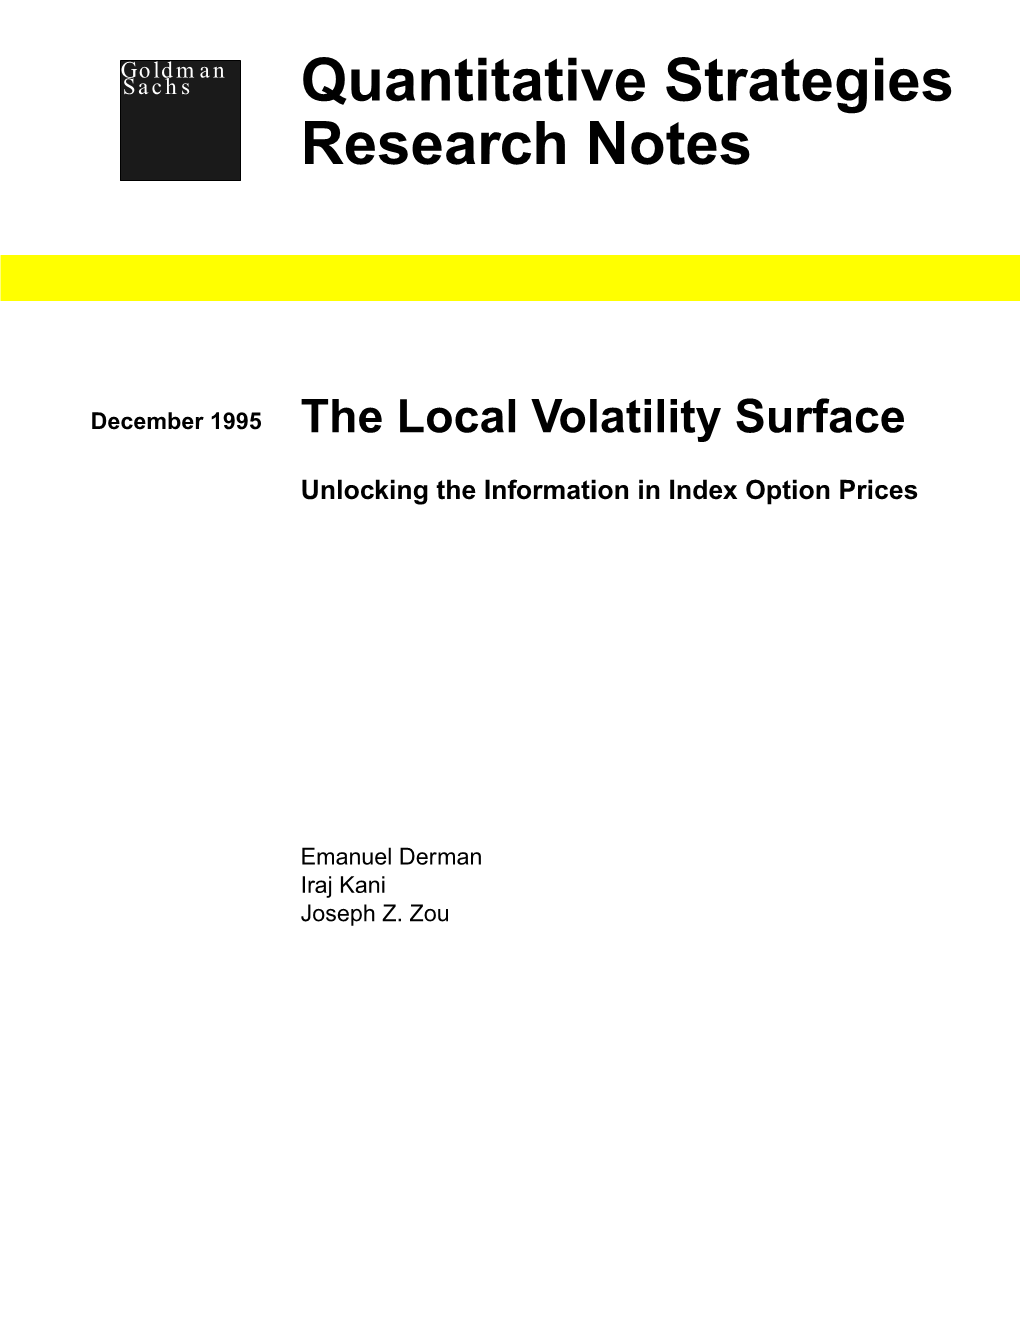 The Local Volatility Surface